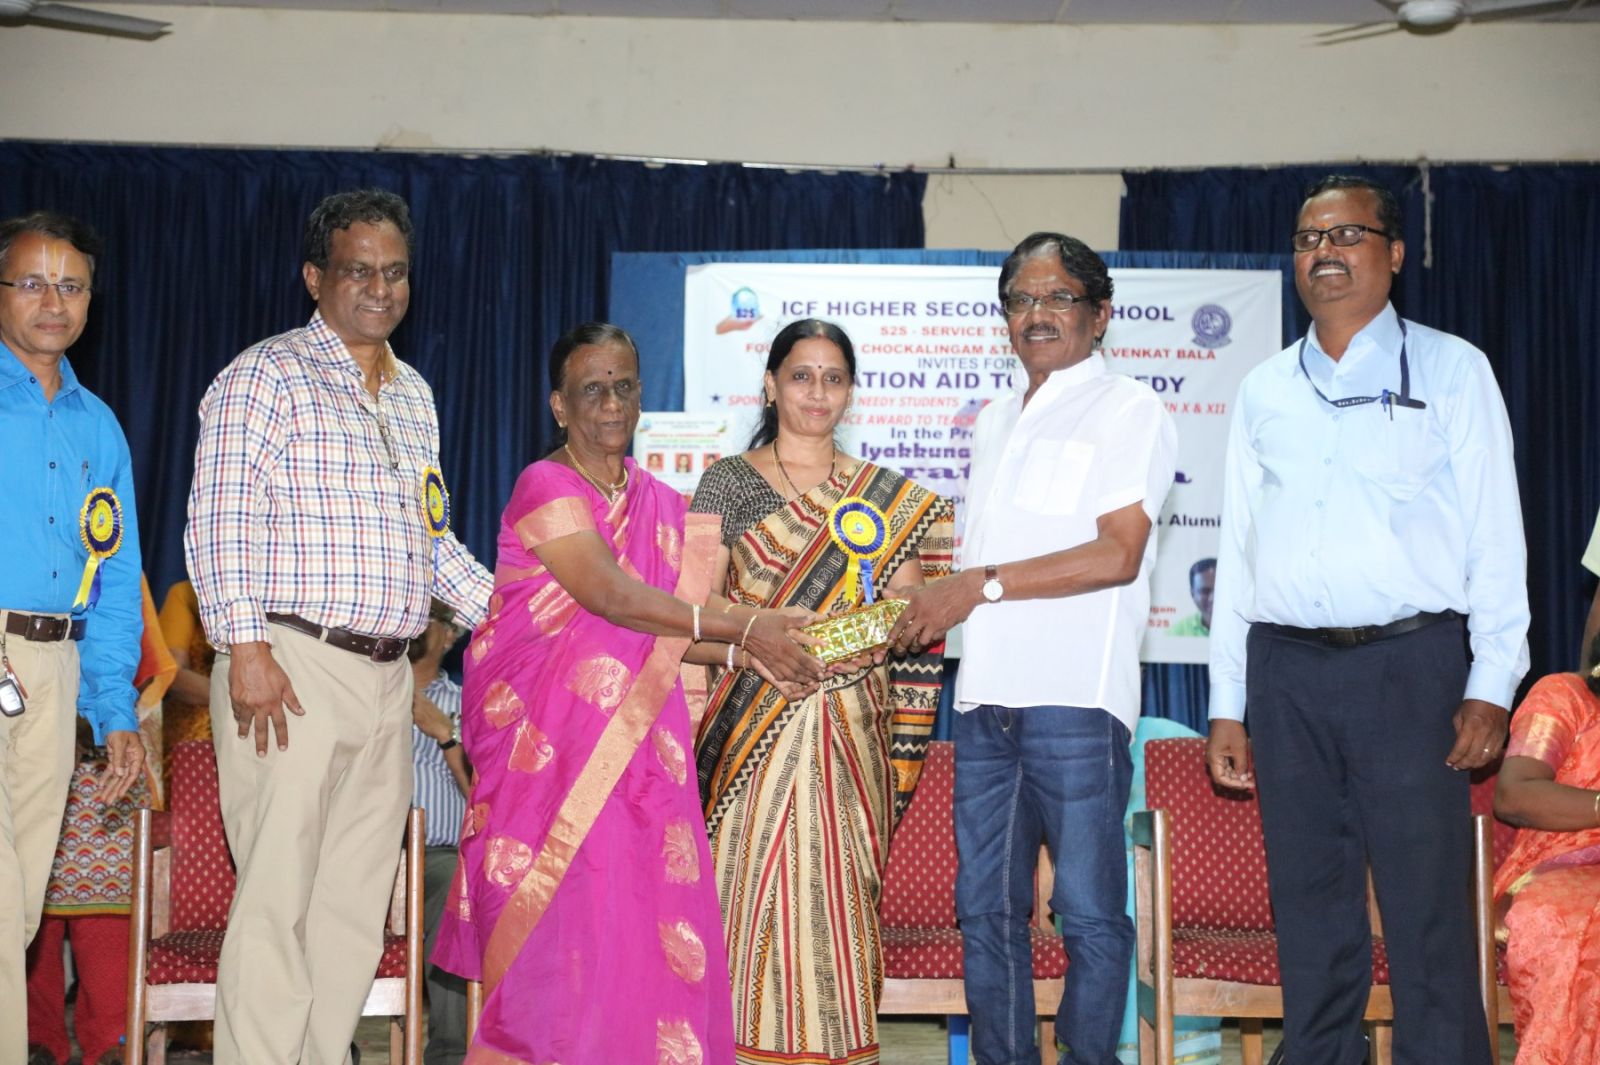 Bharathiraja at Service To Society (S2S) 6th Educational AID Program - ICF Higher Secondary  (57)